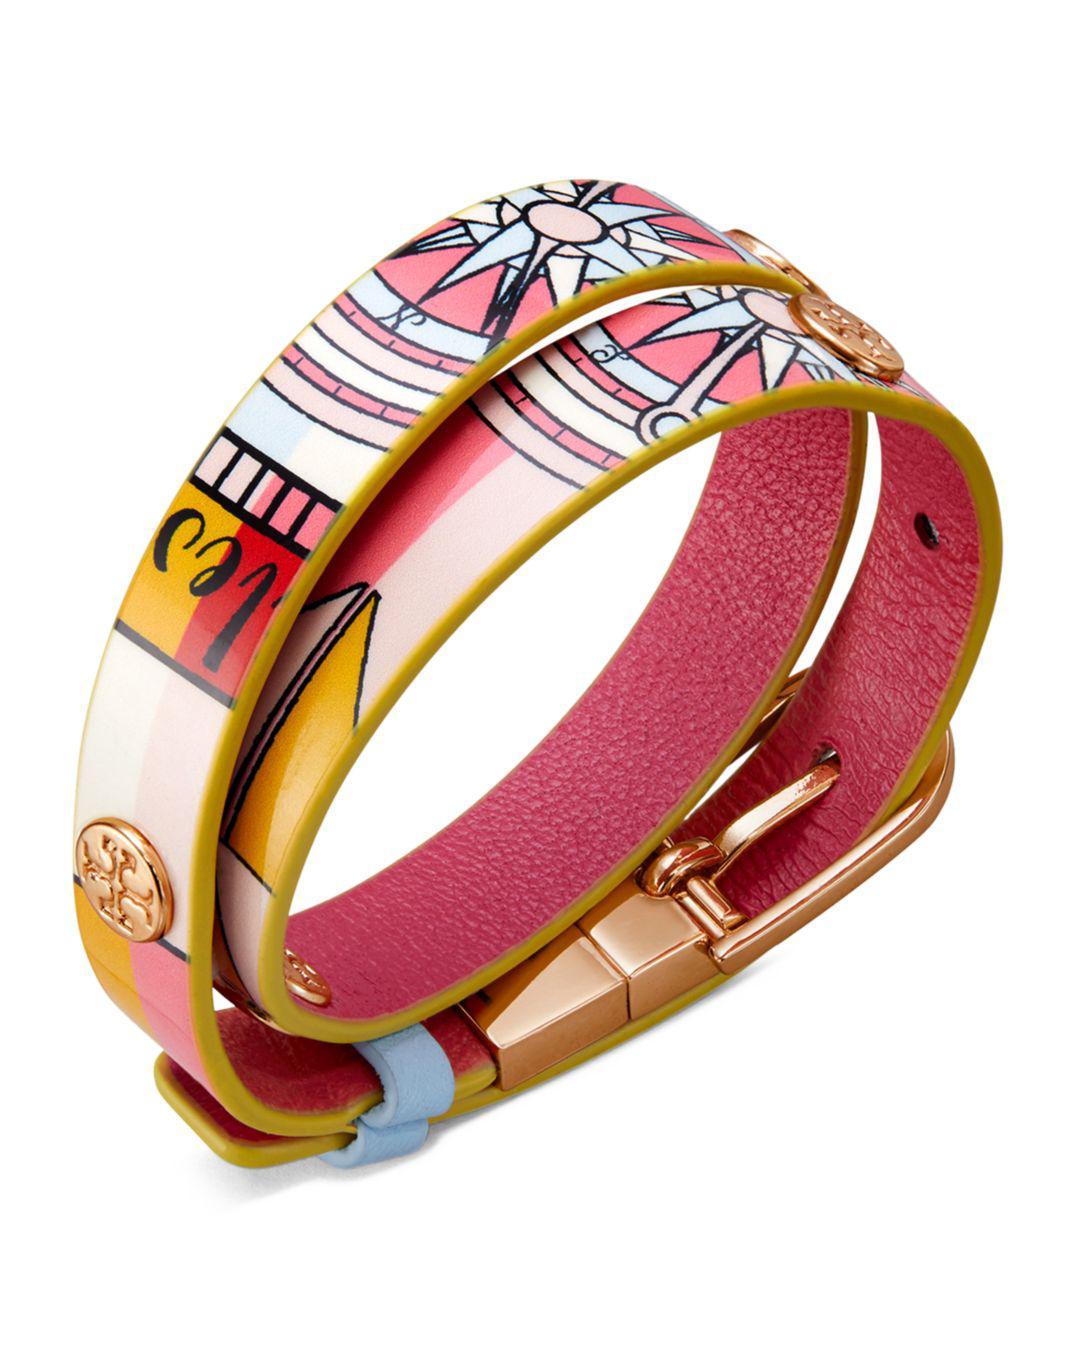 Lyst - Tory Burch Printed Reversible Leather Wrap Bracelet in Pink